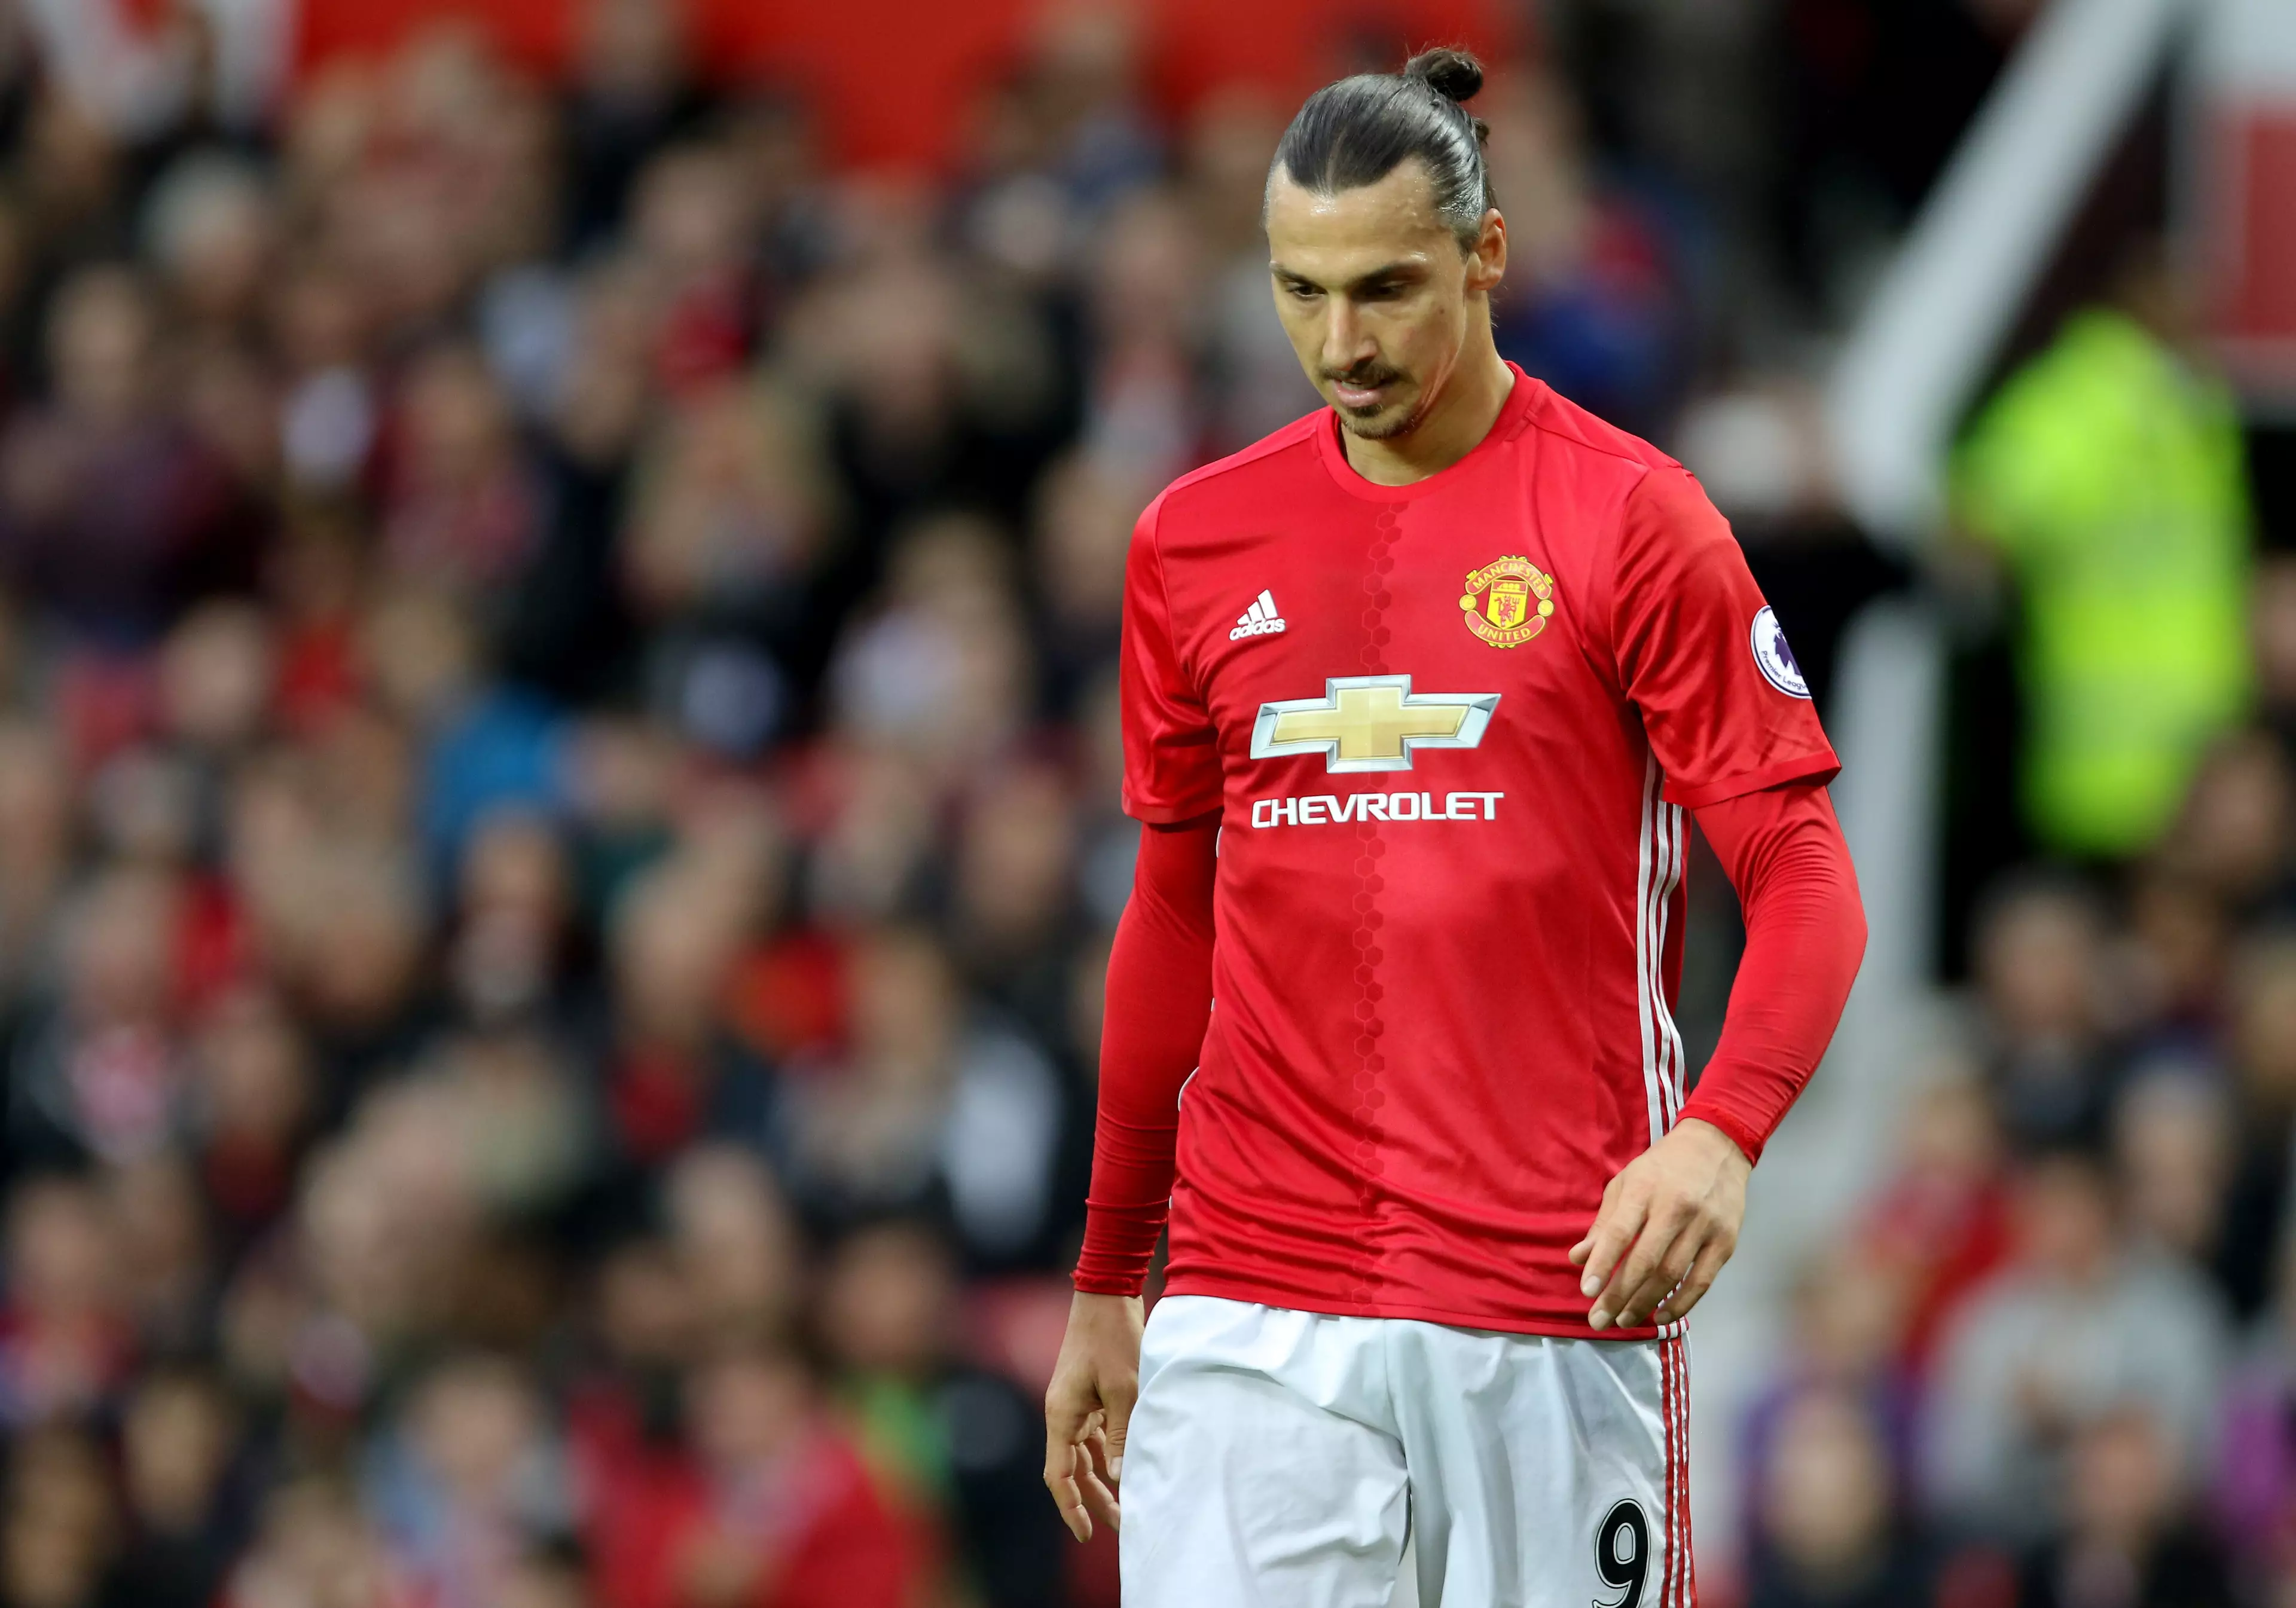 Manchester United's Zlatan Ibrahimovic May Be Suspended For THAT Gesture